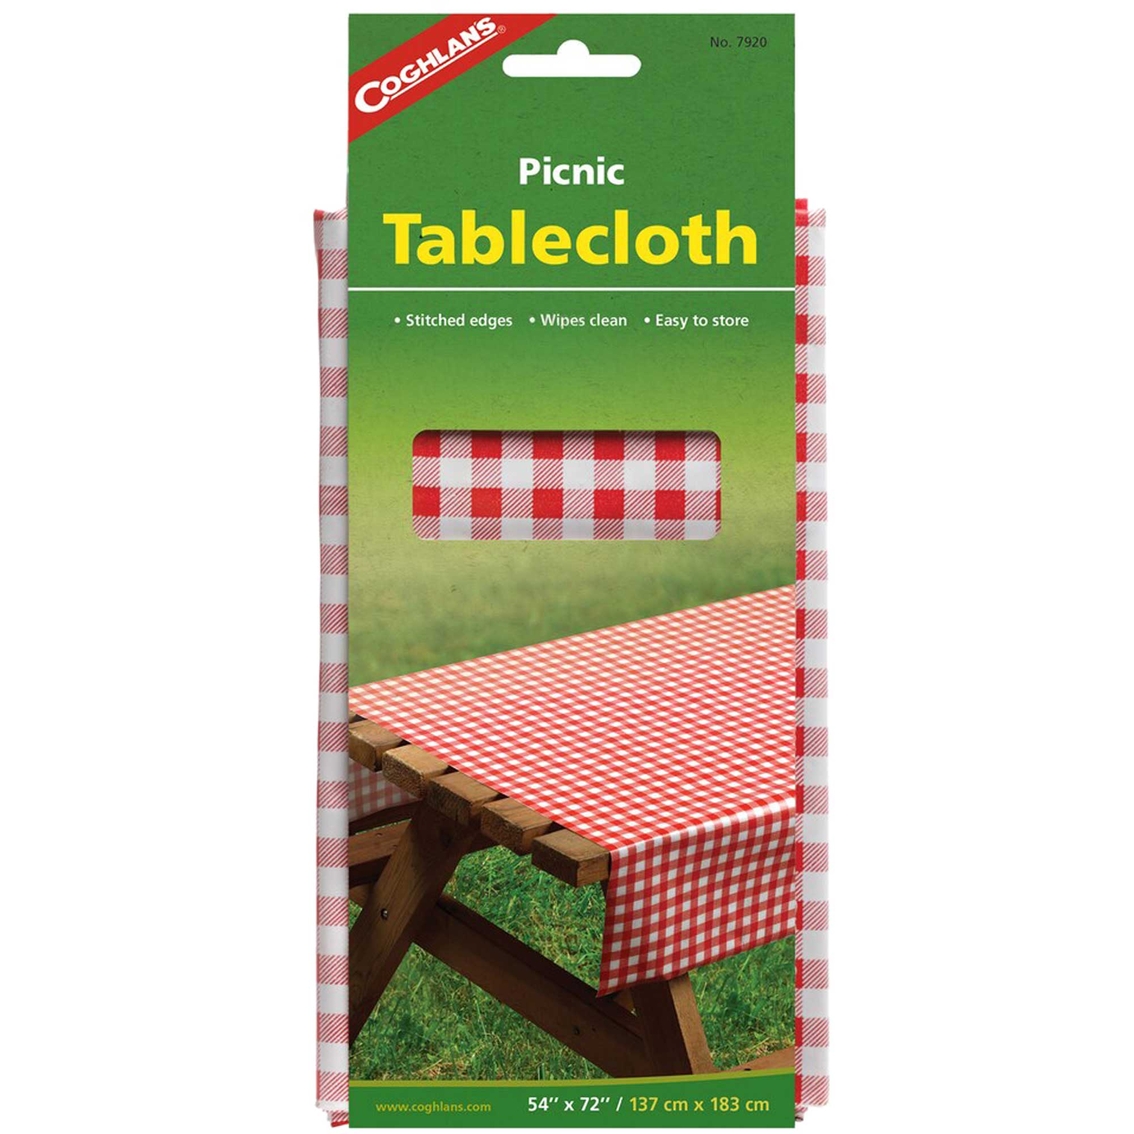 Coghlans 54 x 72 in. Vinyl Tablecloth - Image 2 of 3